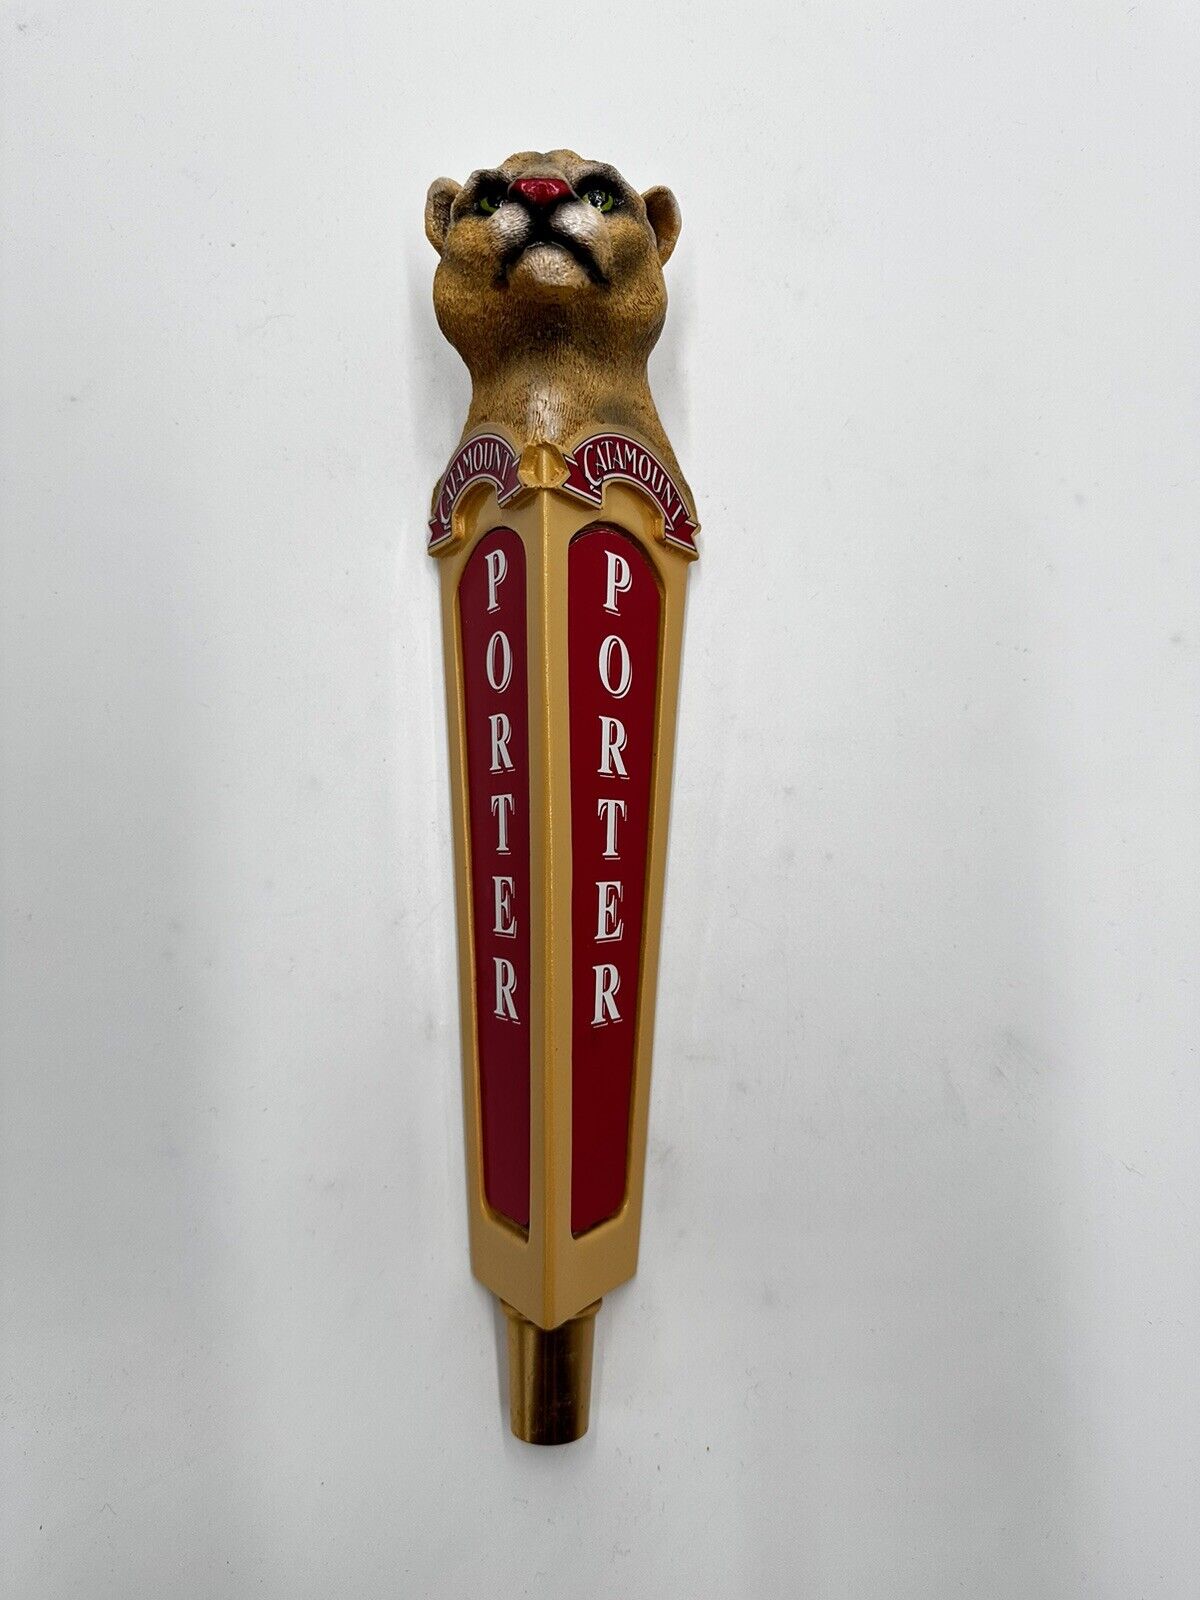 Catamount Tap Handle Red Lion Porter Vintage Collectible Beer Tap 